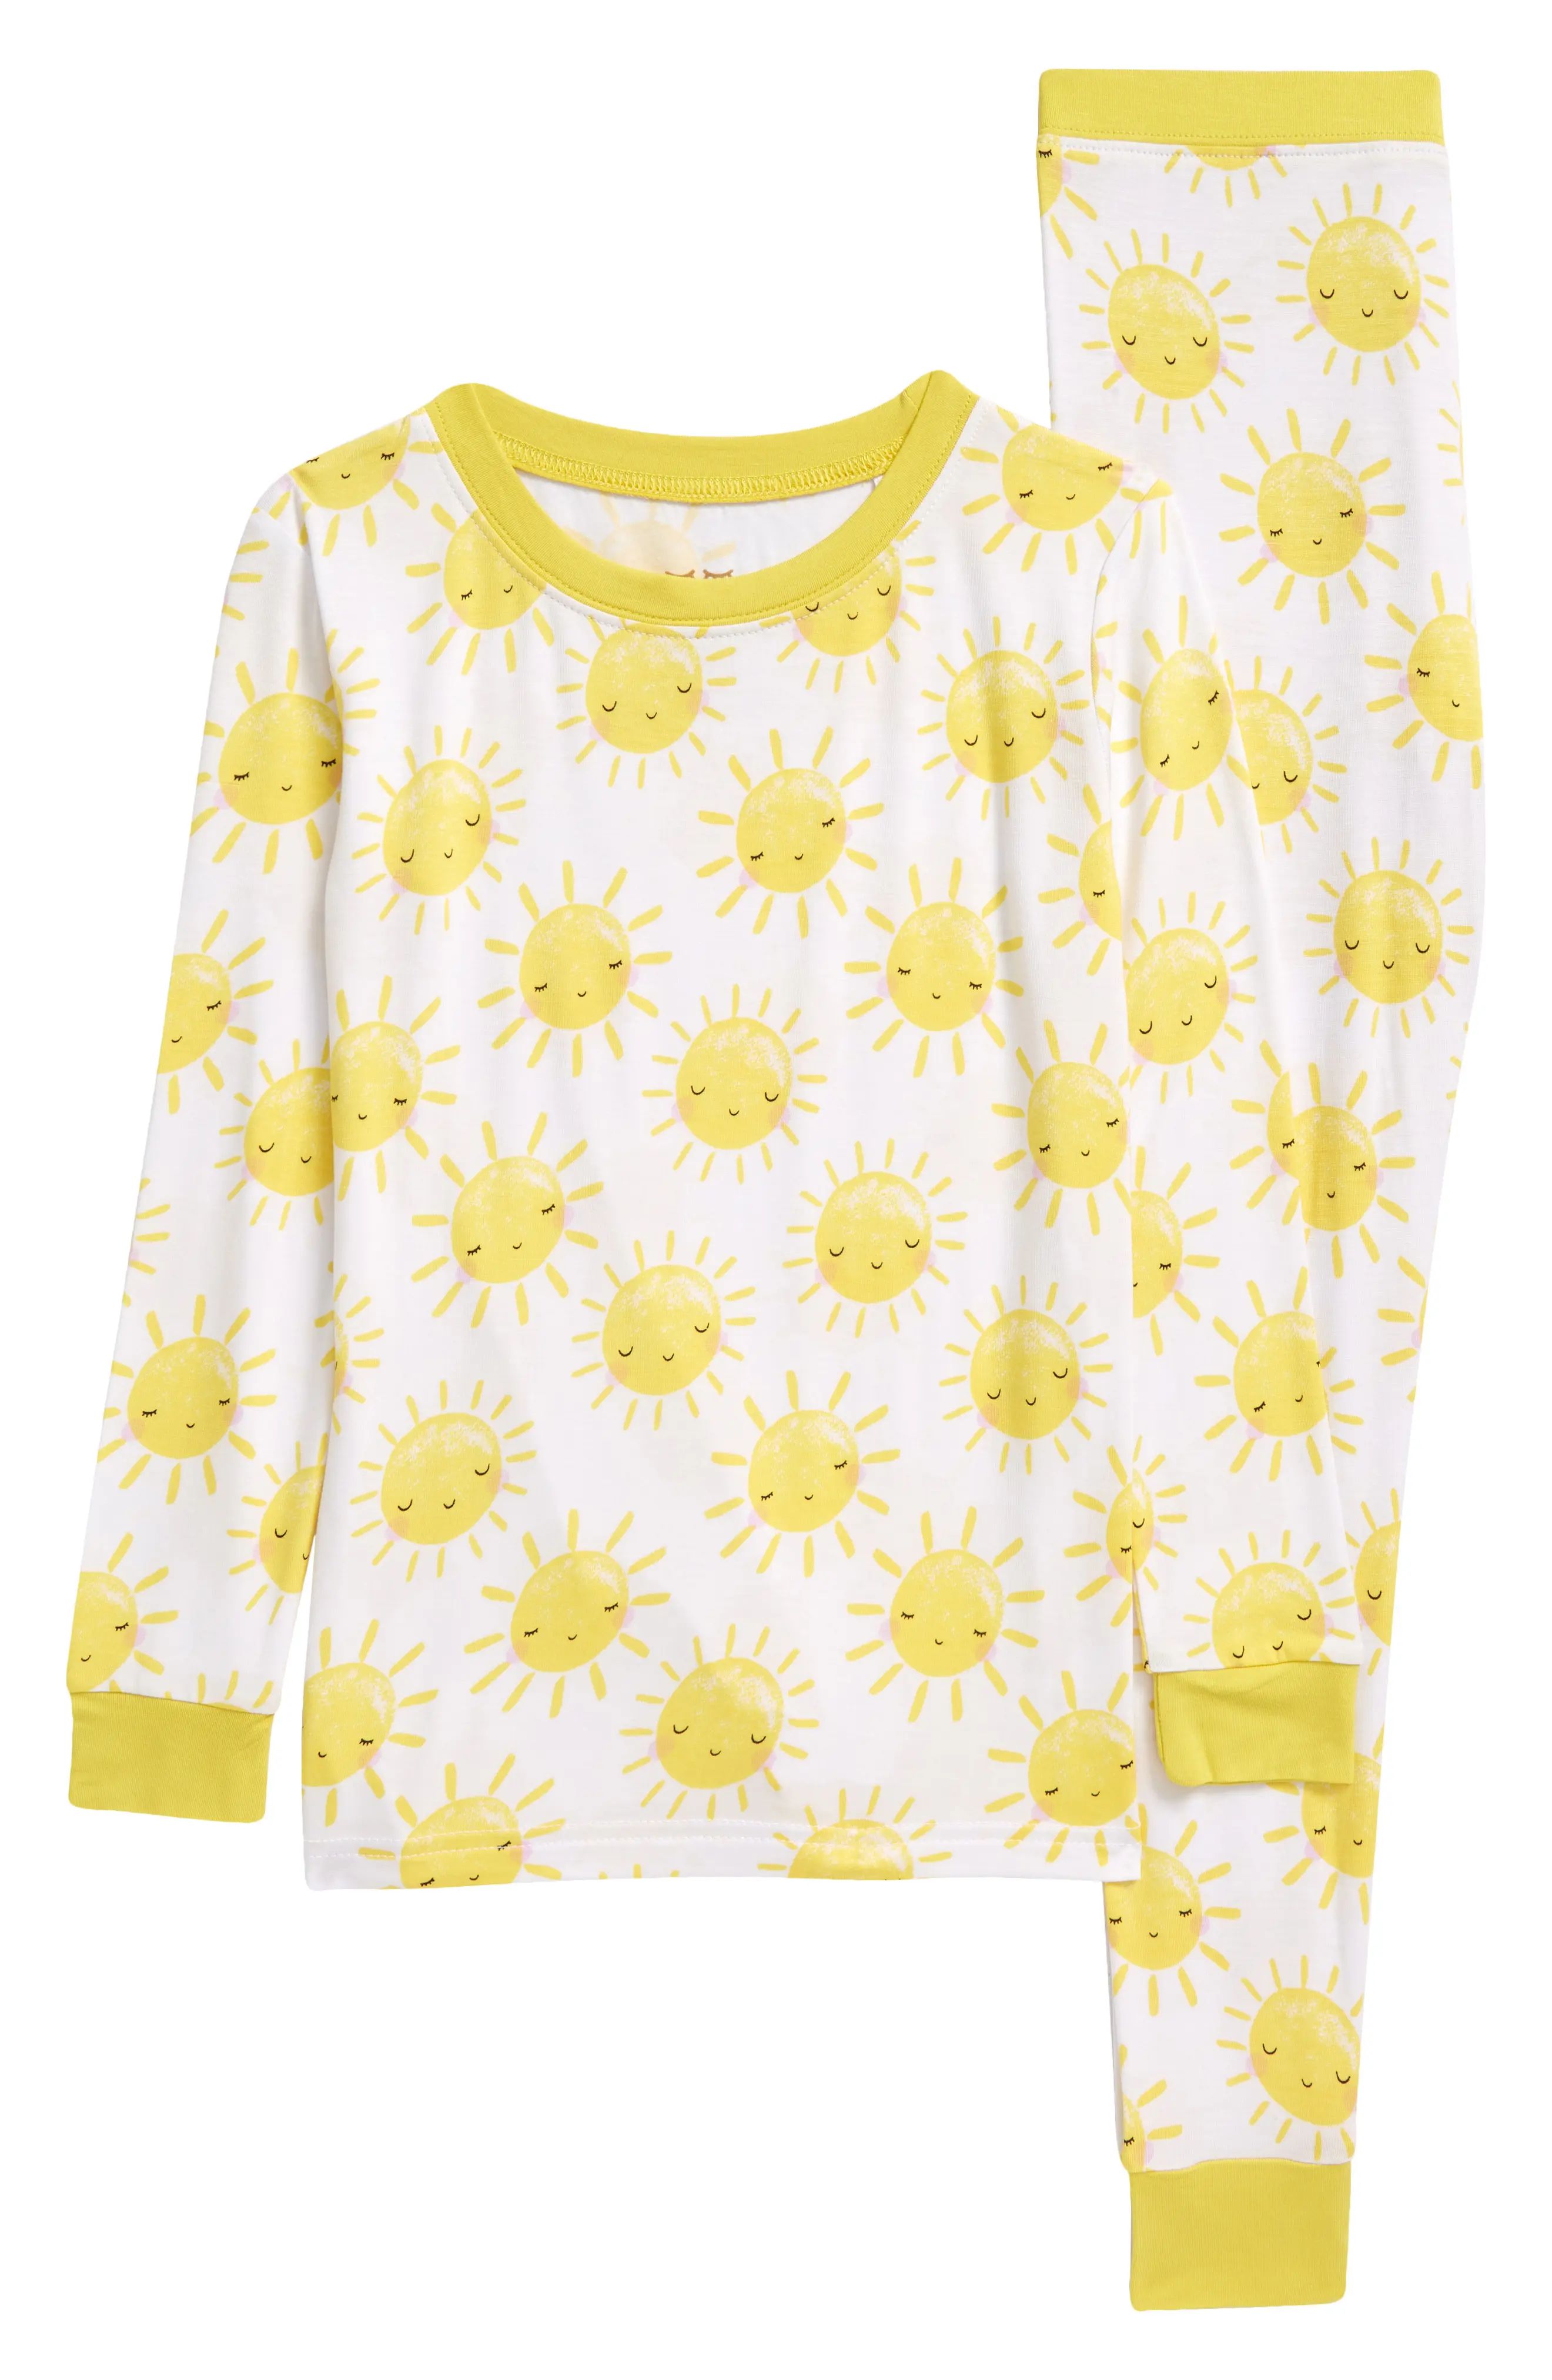 Little Sleepies Kids' Sunshine Fitted Two-Piece Pajamas at Nordstrom, Size 3T | Nordstrom